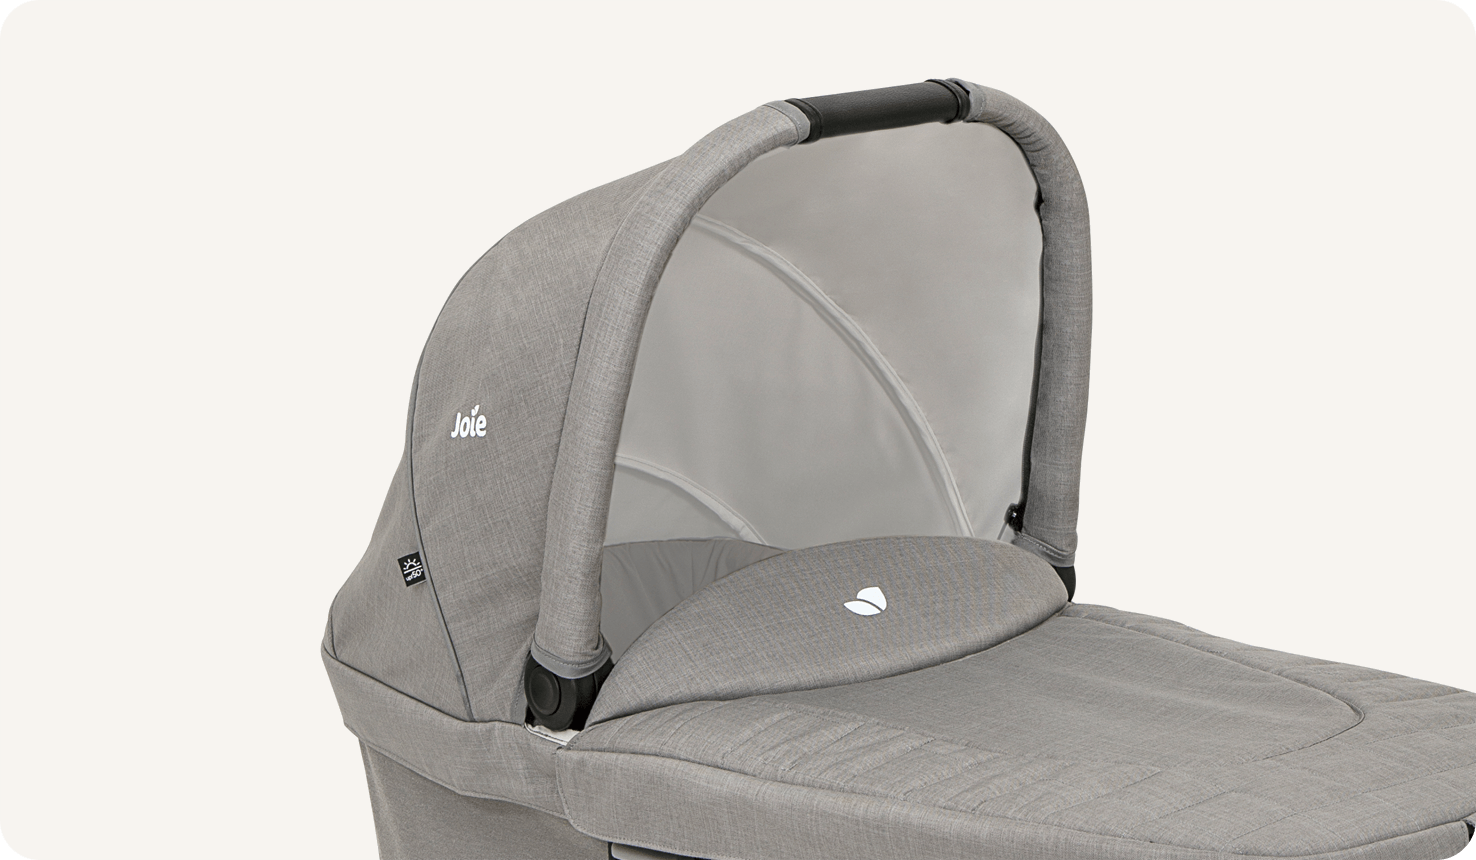 Joie chrome carry cot in light gray at an angle from the front.